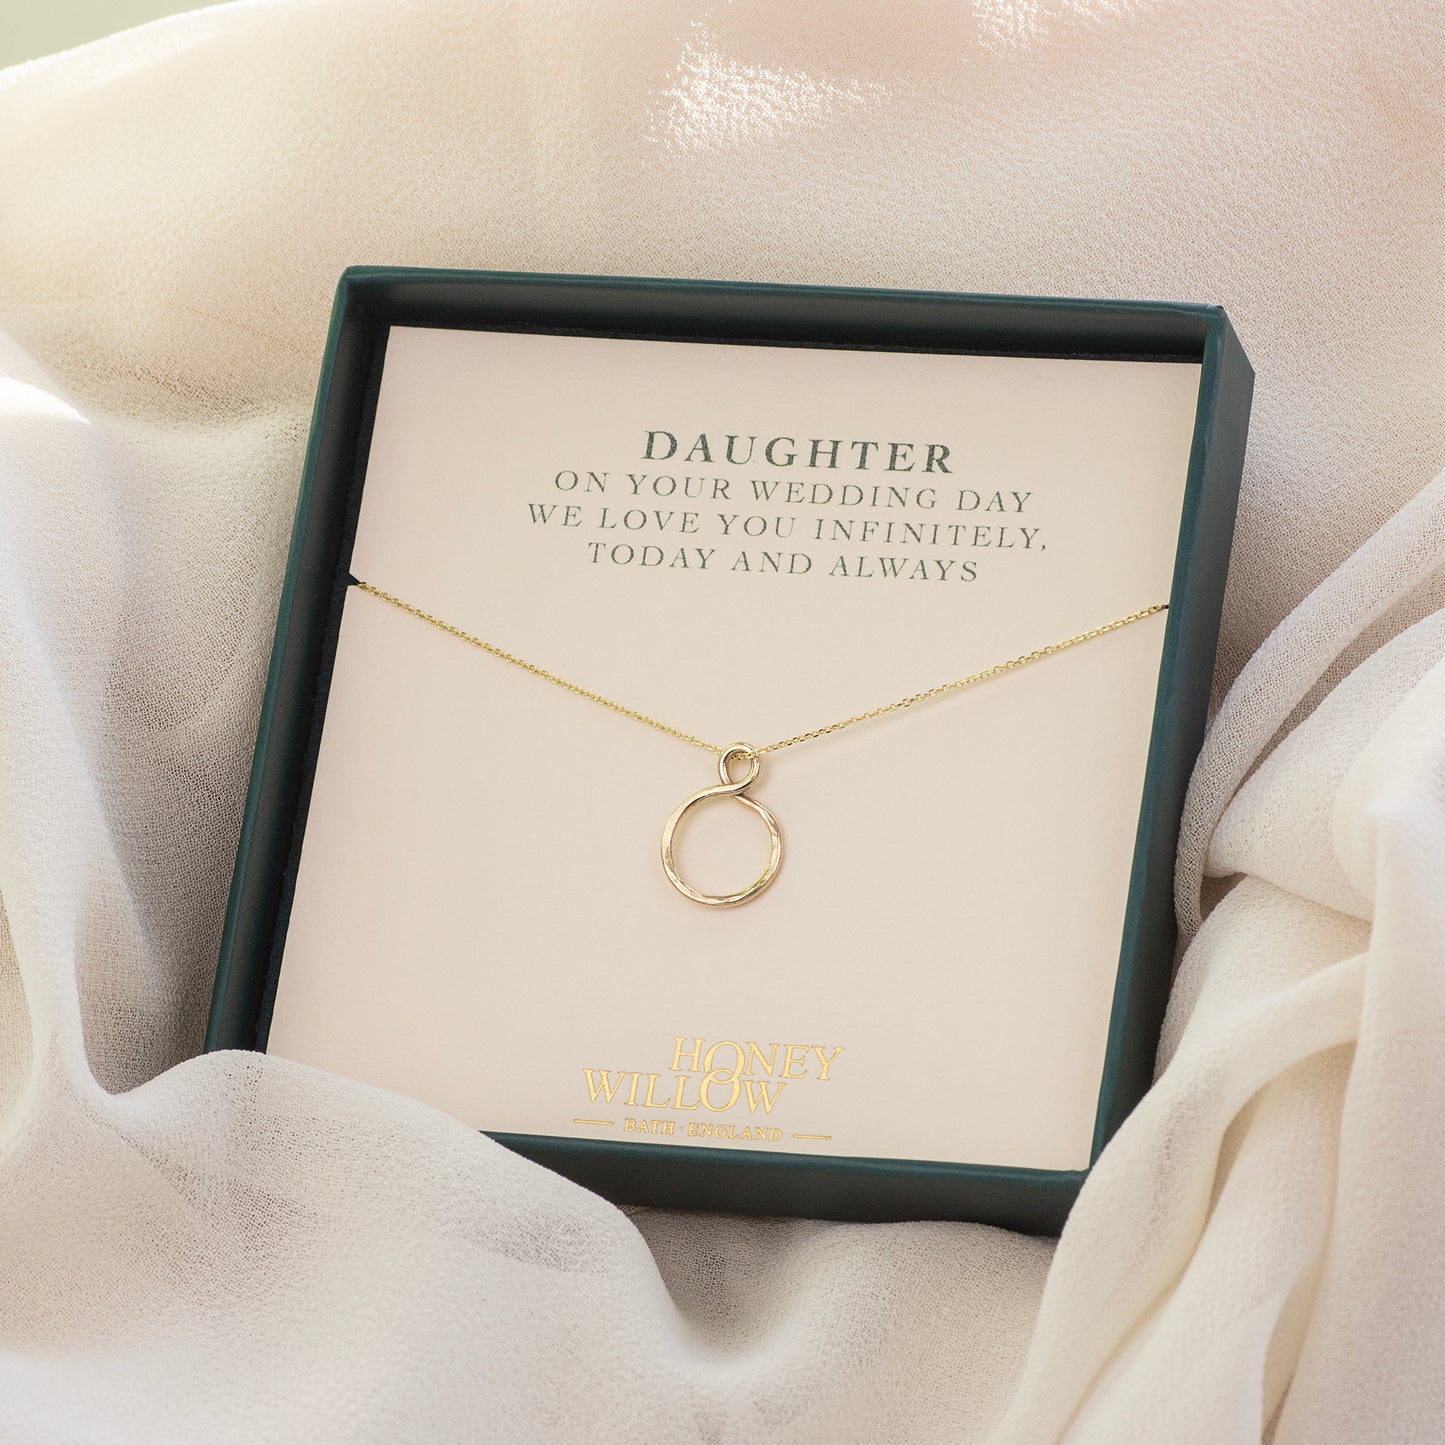 Wedding Day Gift for Daughter - 9kt Gold Infinity Necklace